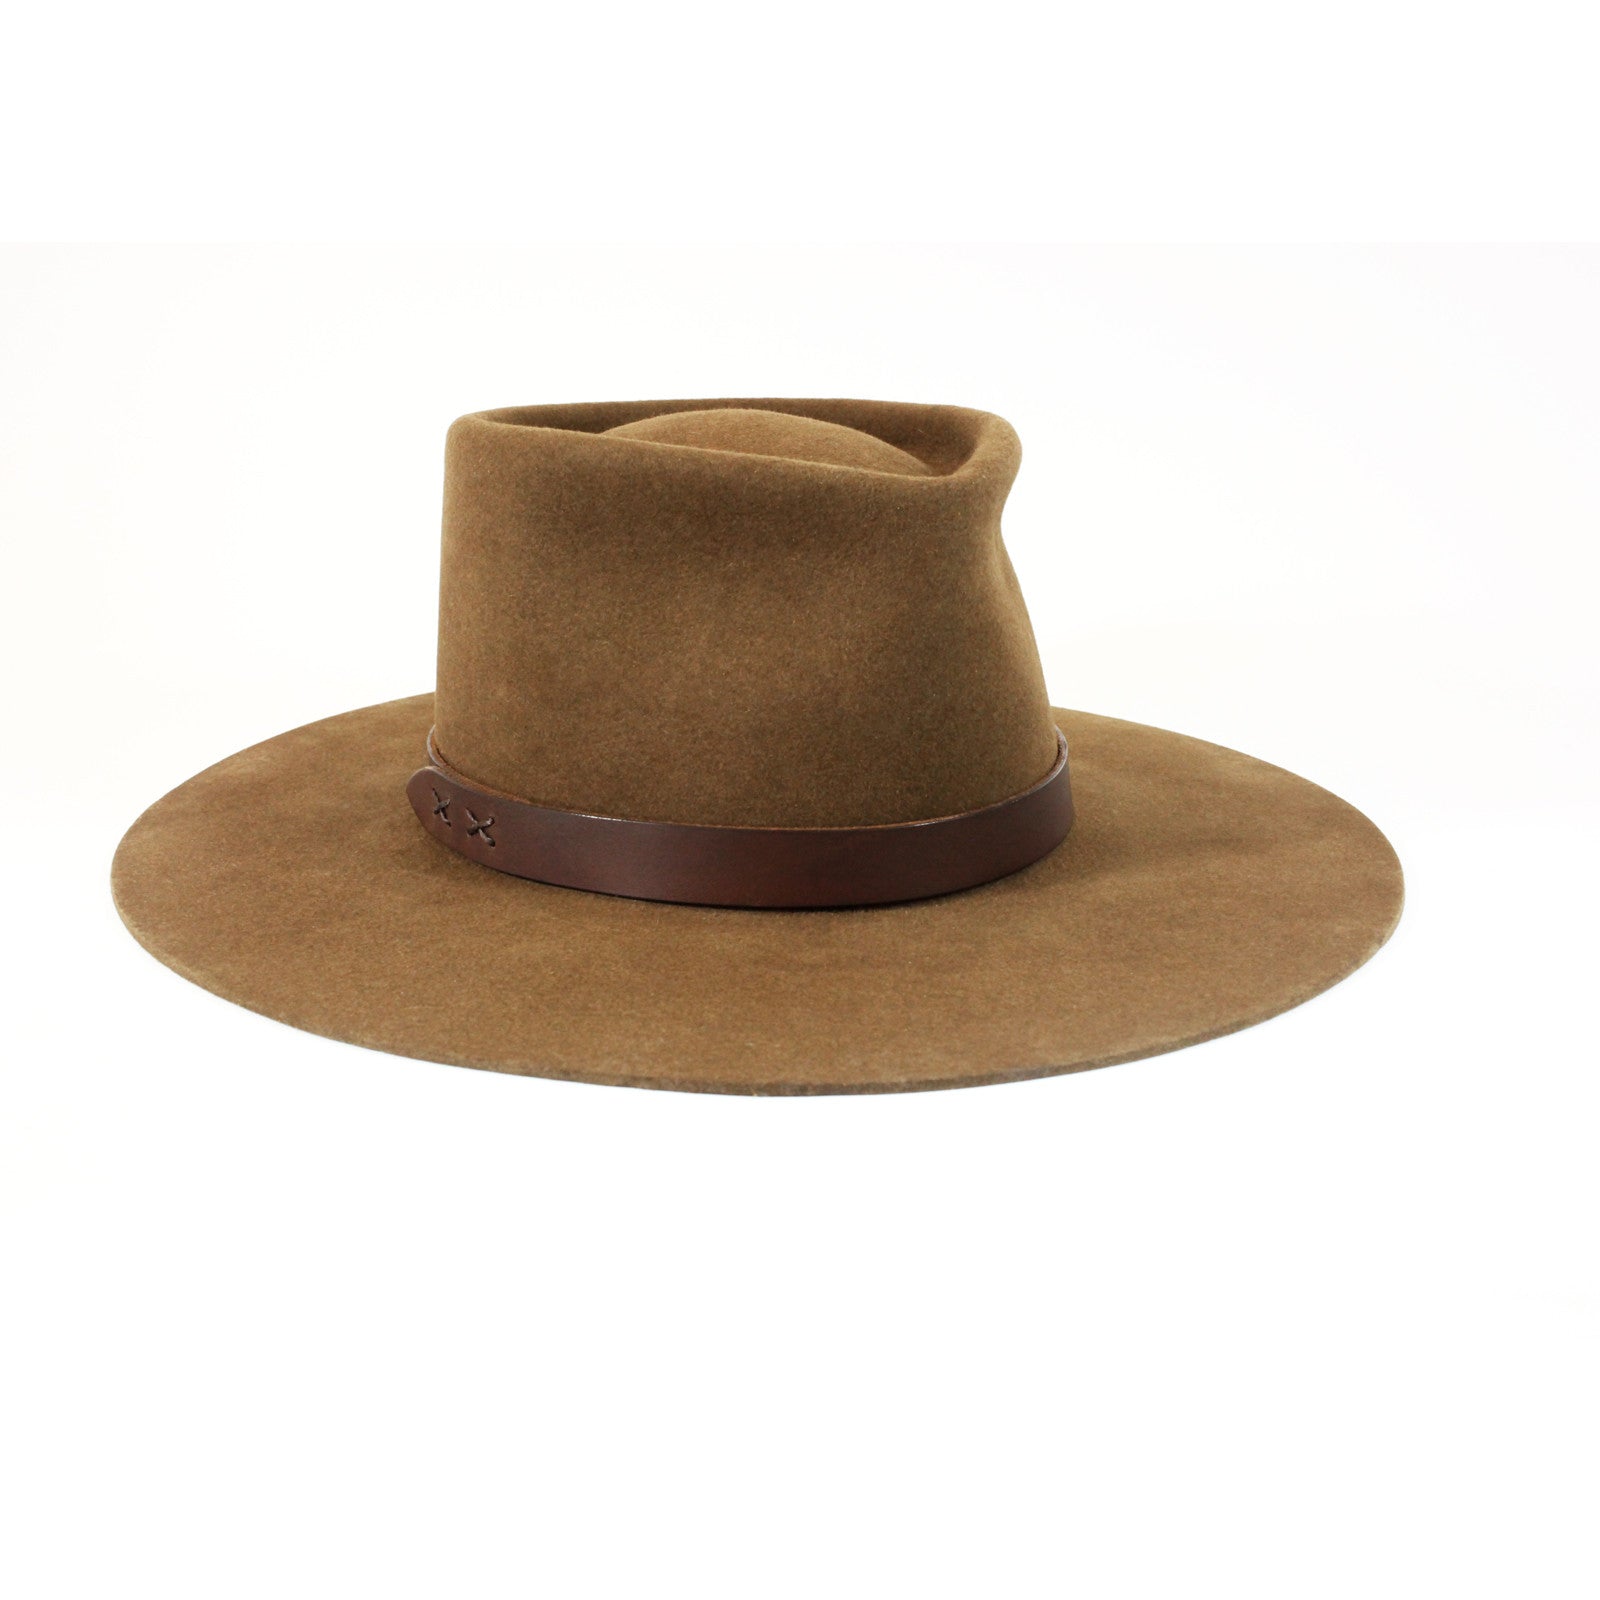 The High Noon Hat